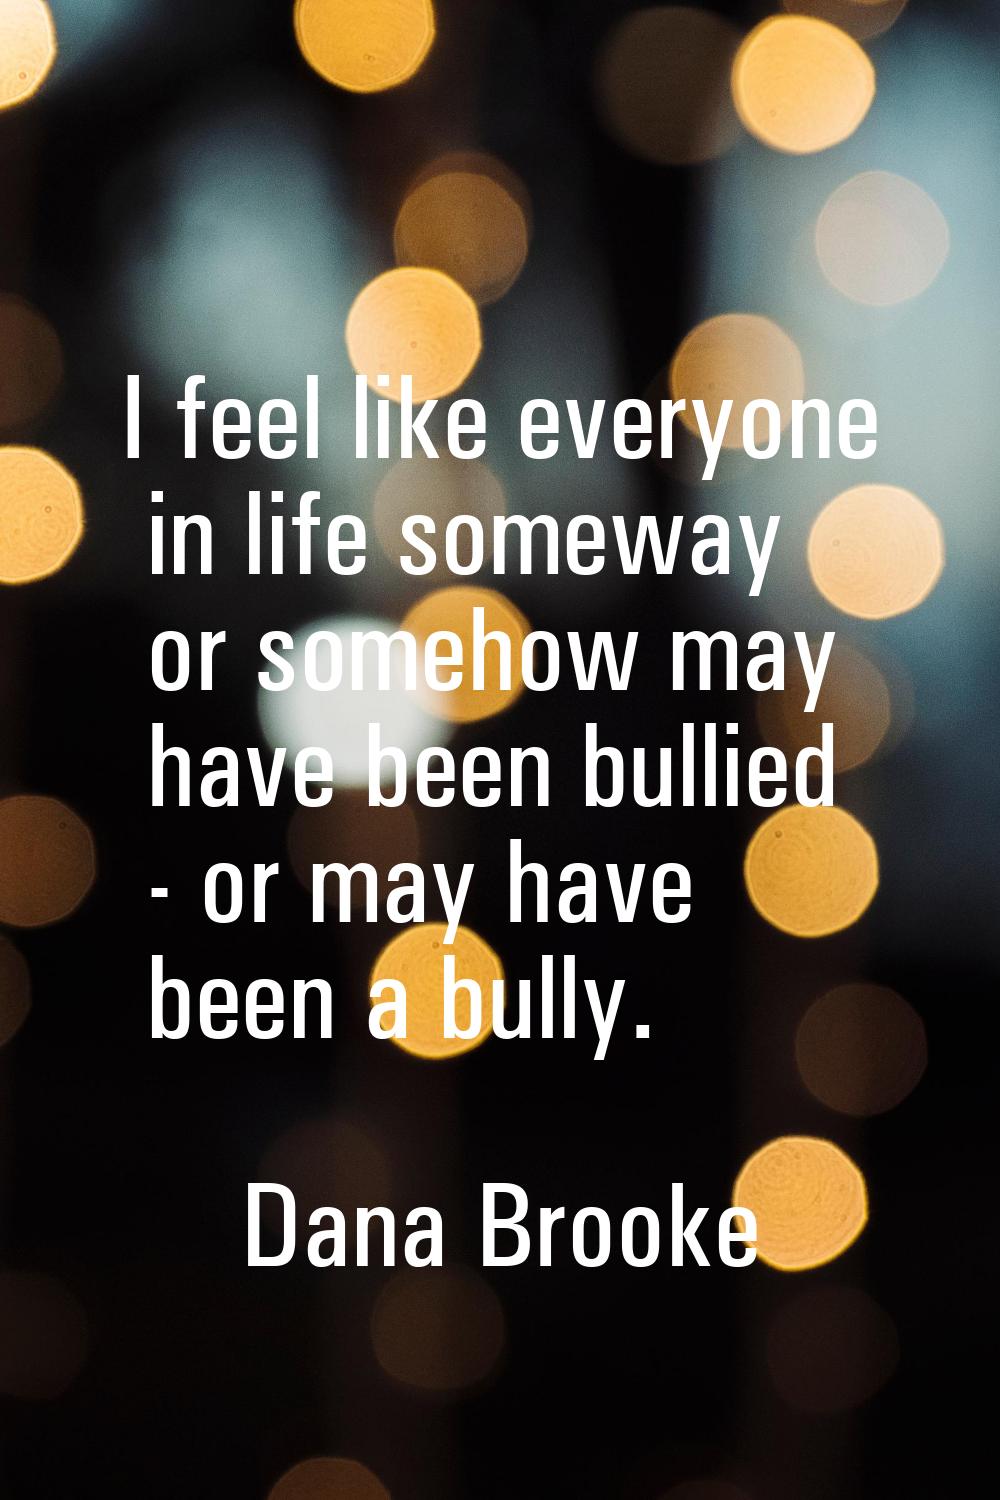 I feel like everyone in life someway or somehow may have been bullied - or may have been a bully.